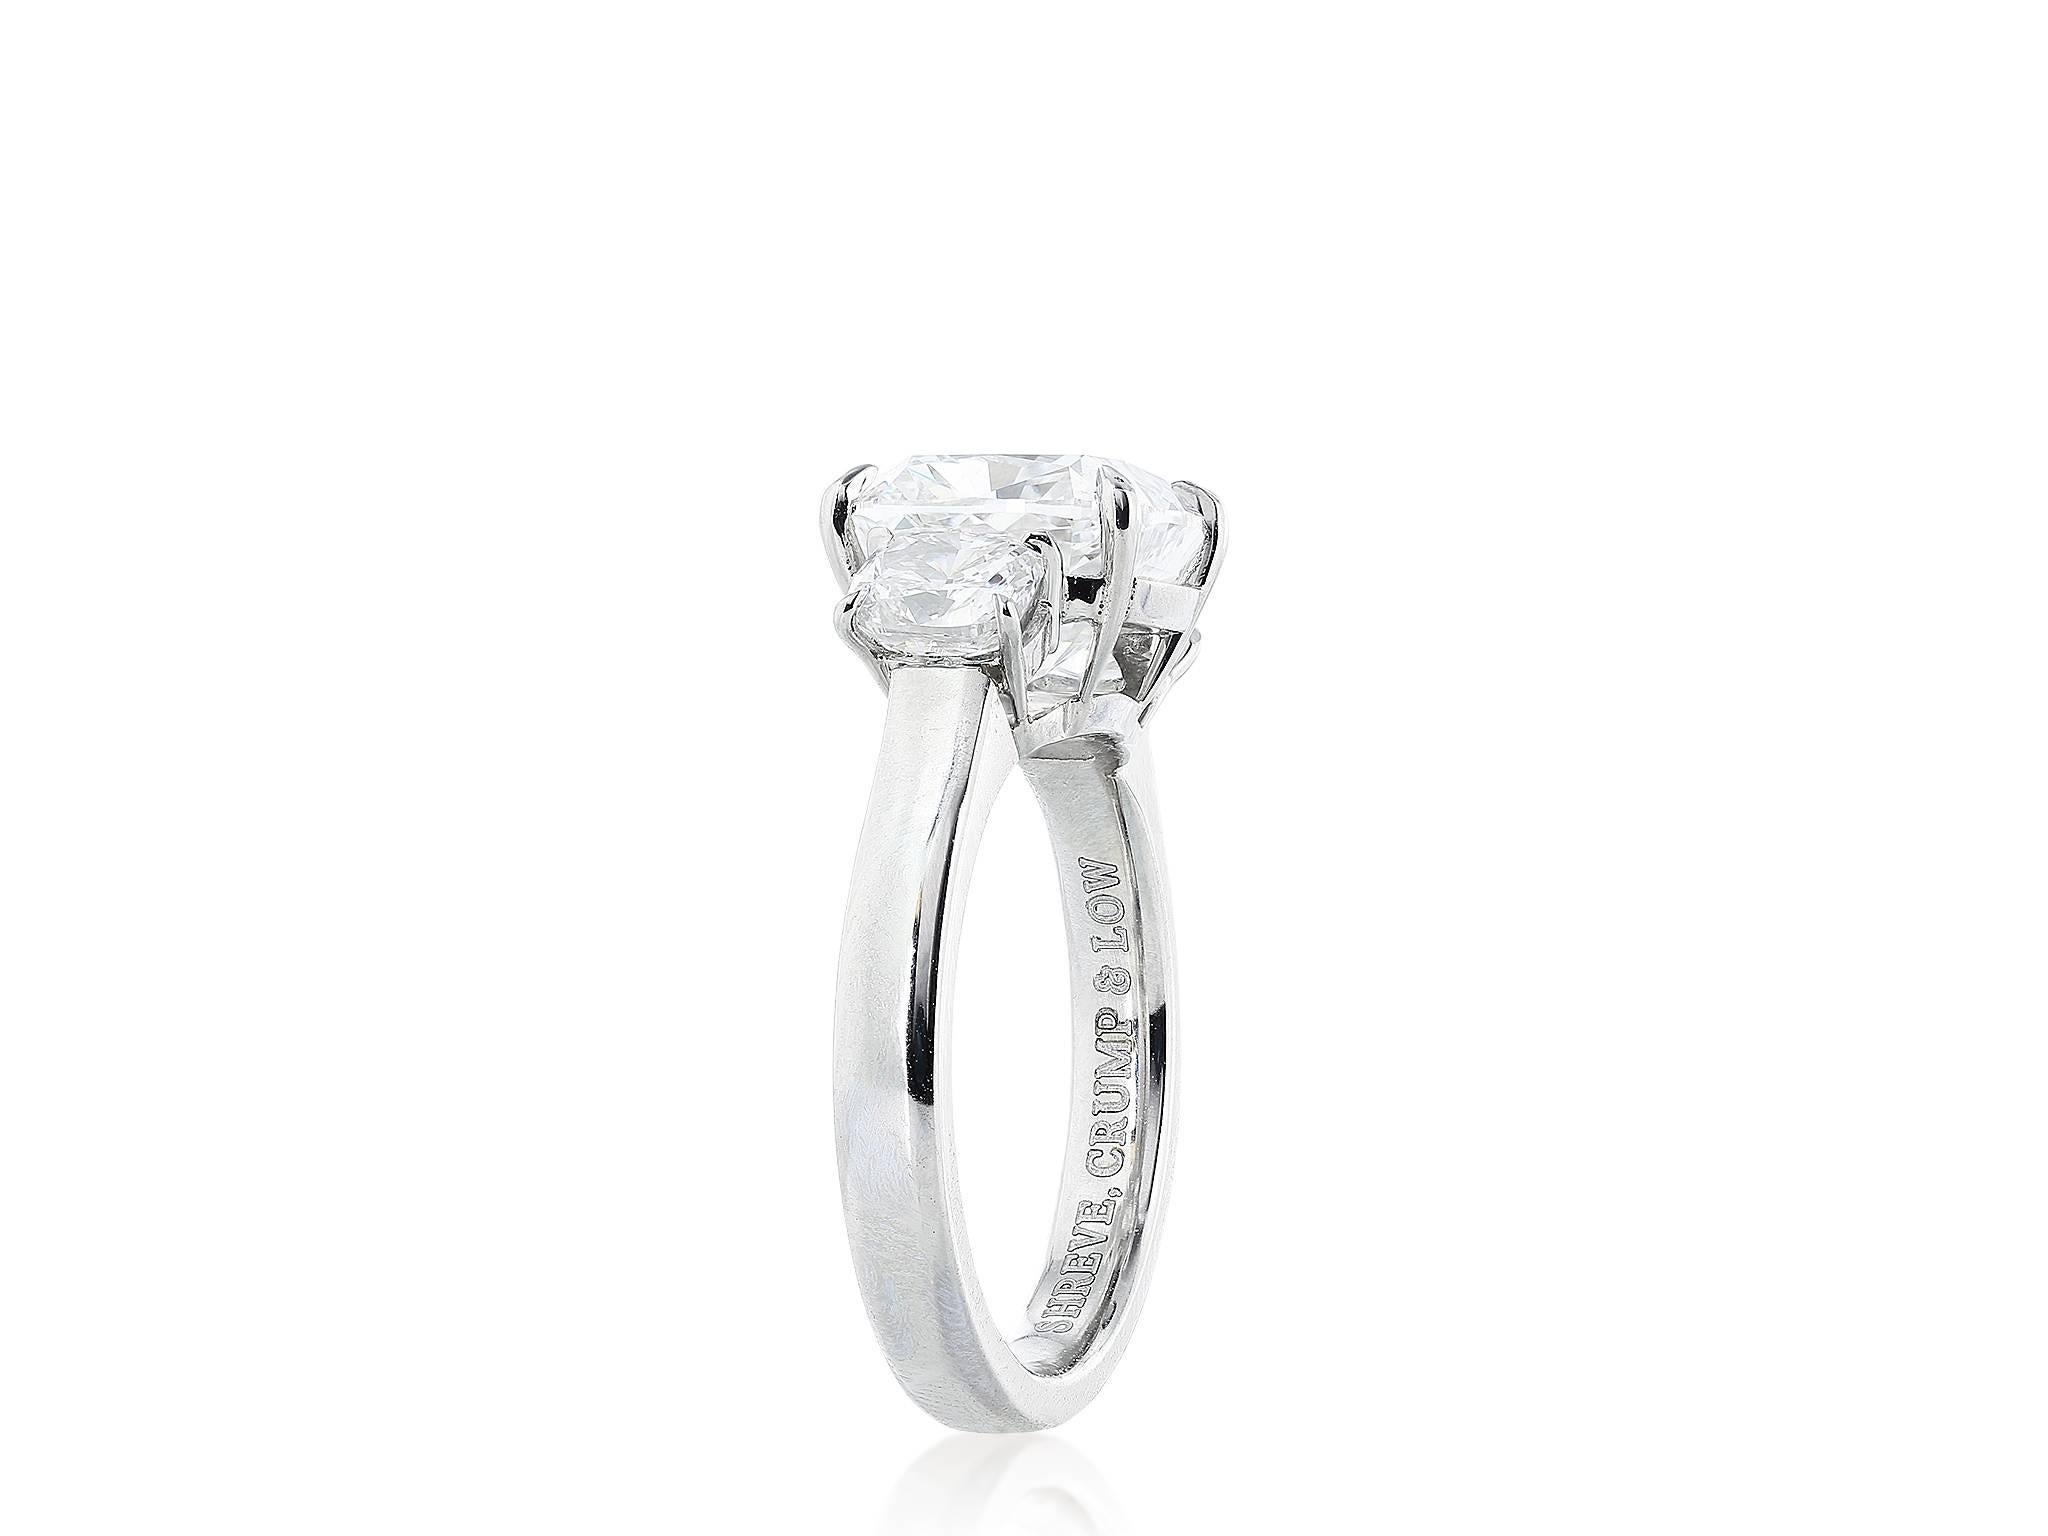 Platinum custom made 3 Stone cushion cut ring consisting of a 4.02 carat center stone having a color and clarity of G/VS2, measuring 9.04 x 8.49 x 6.09mm with GIA certificate #5166824509, flanked by 2 cushion cut diamonds having a total weight of